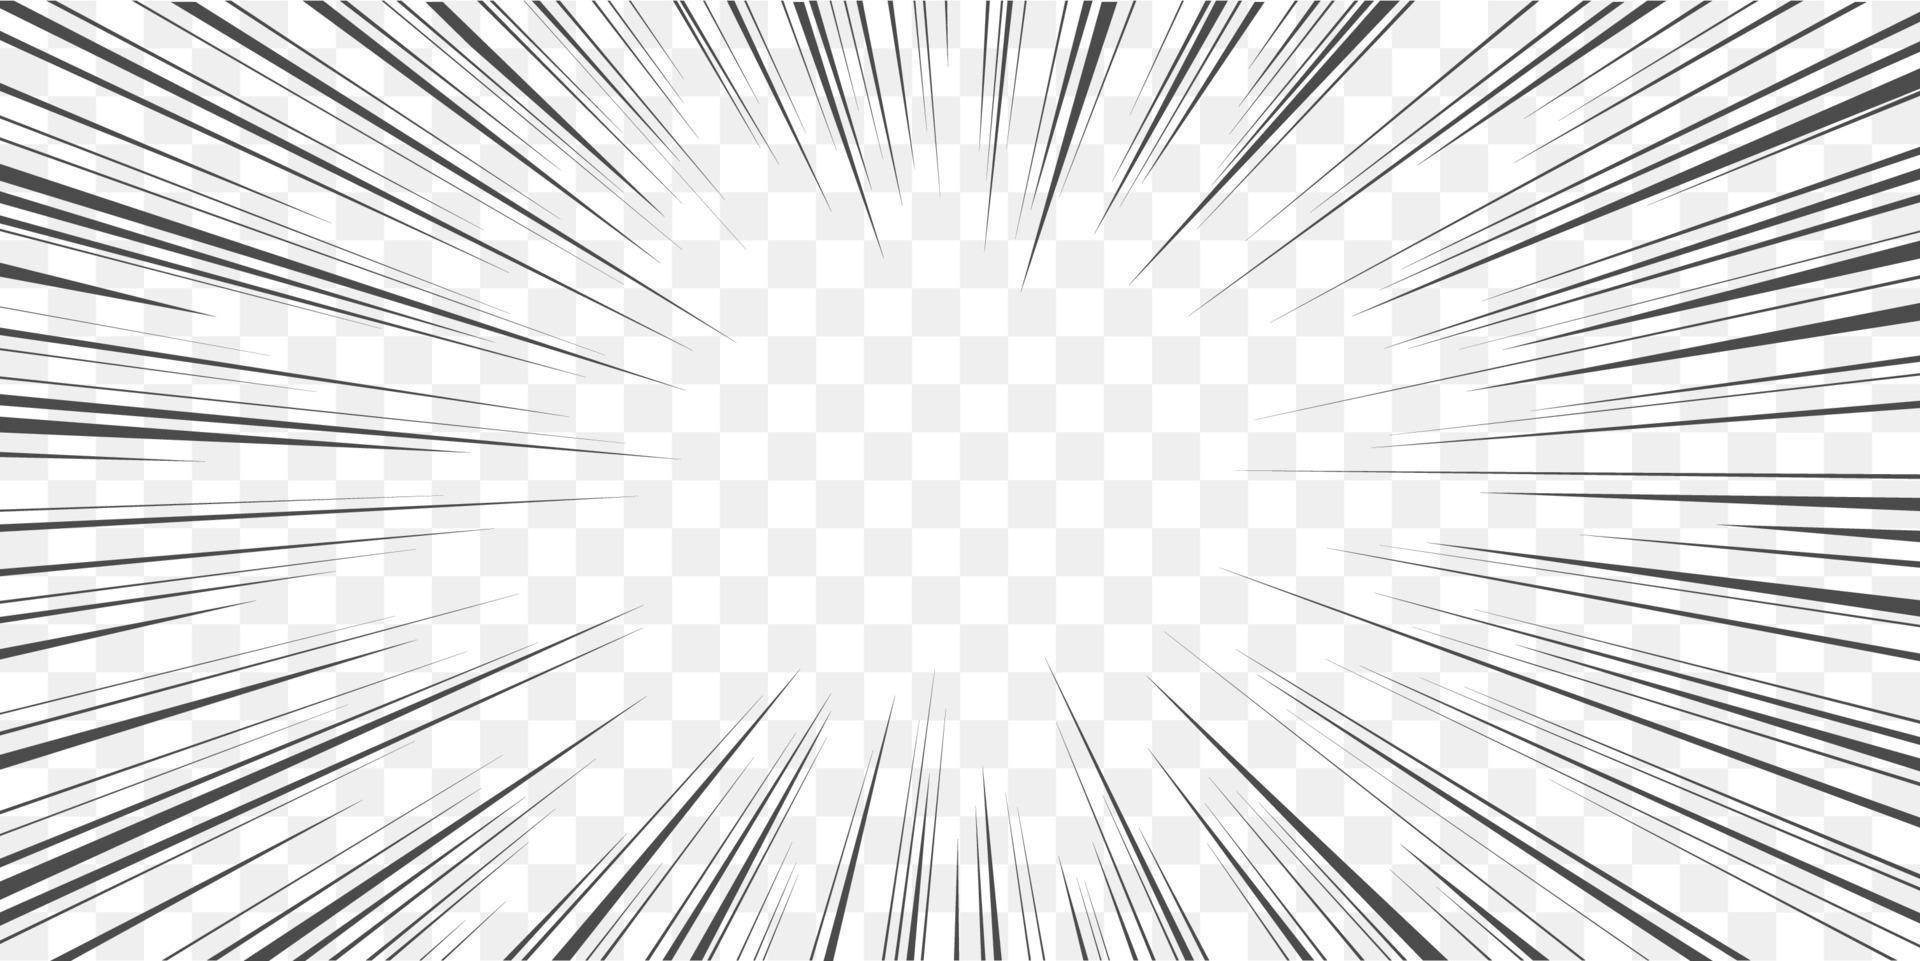 Manga transparent background, speed radial lines vector